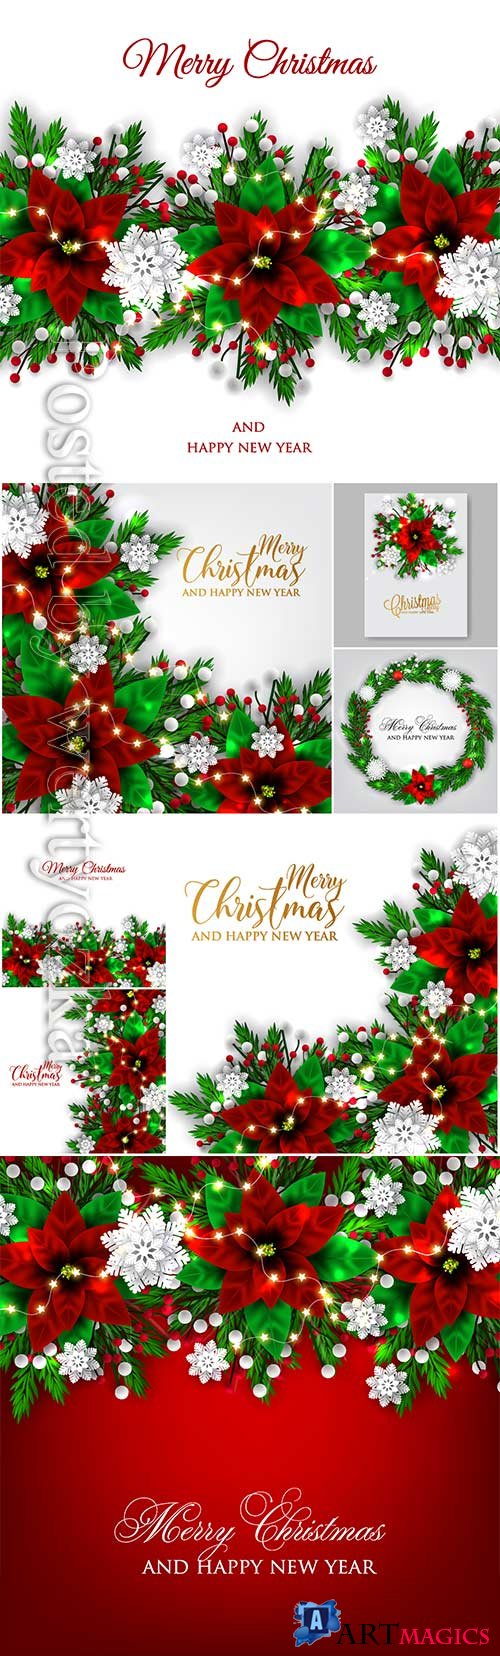 2020 Merry Chistmas and Happy New Year vector illustration # 9